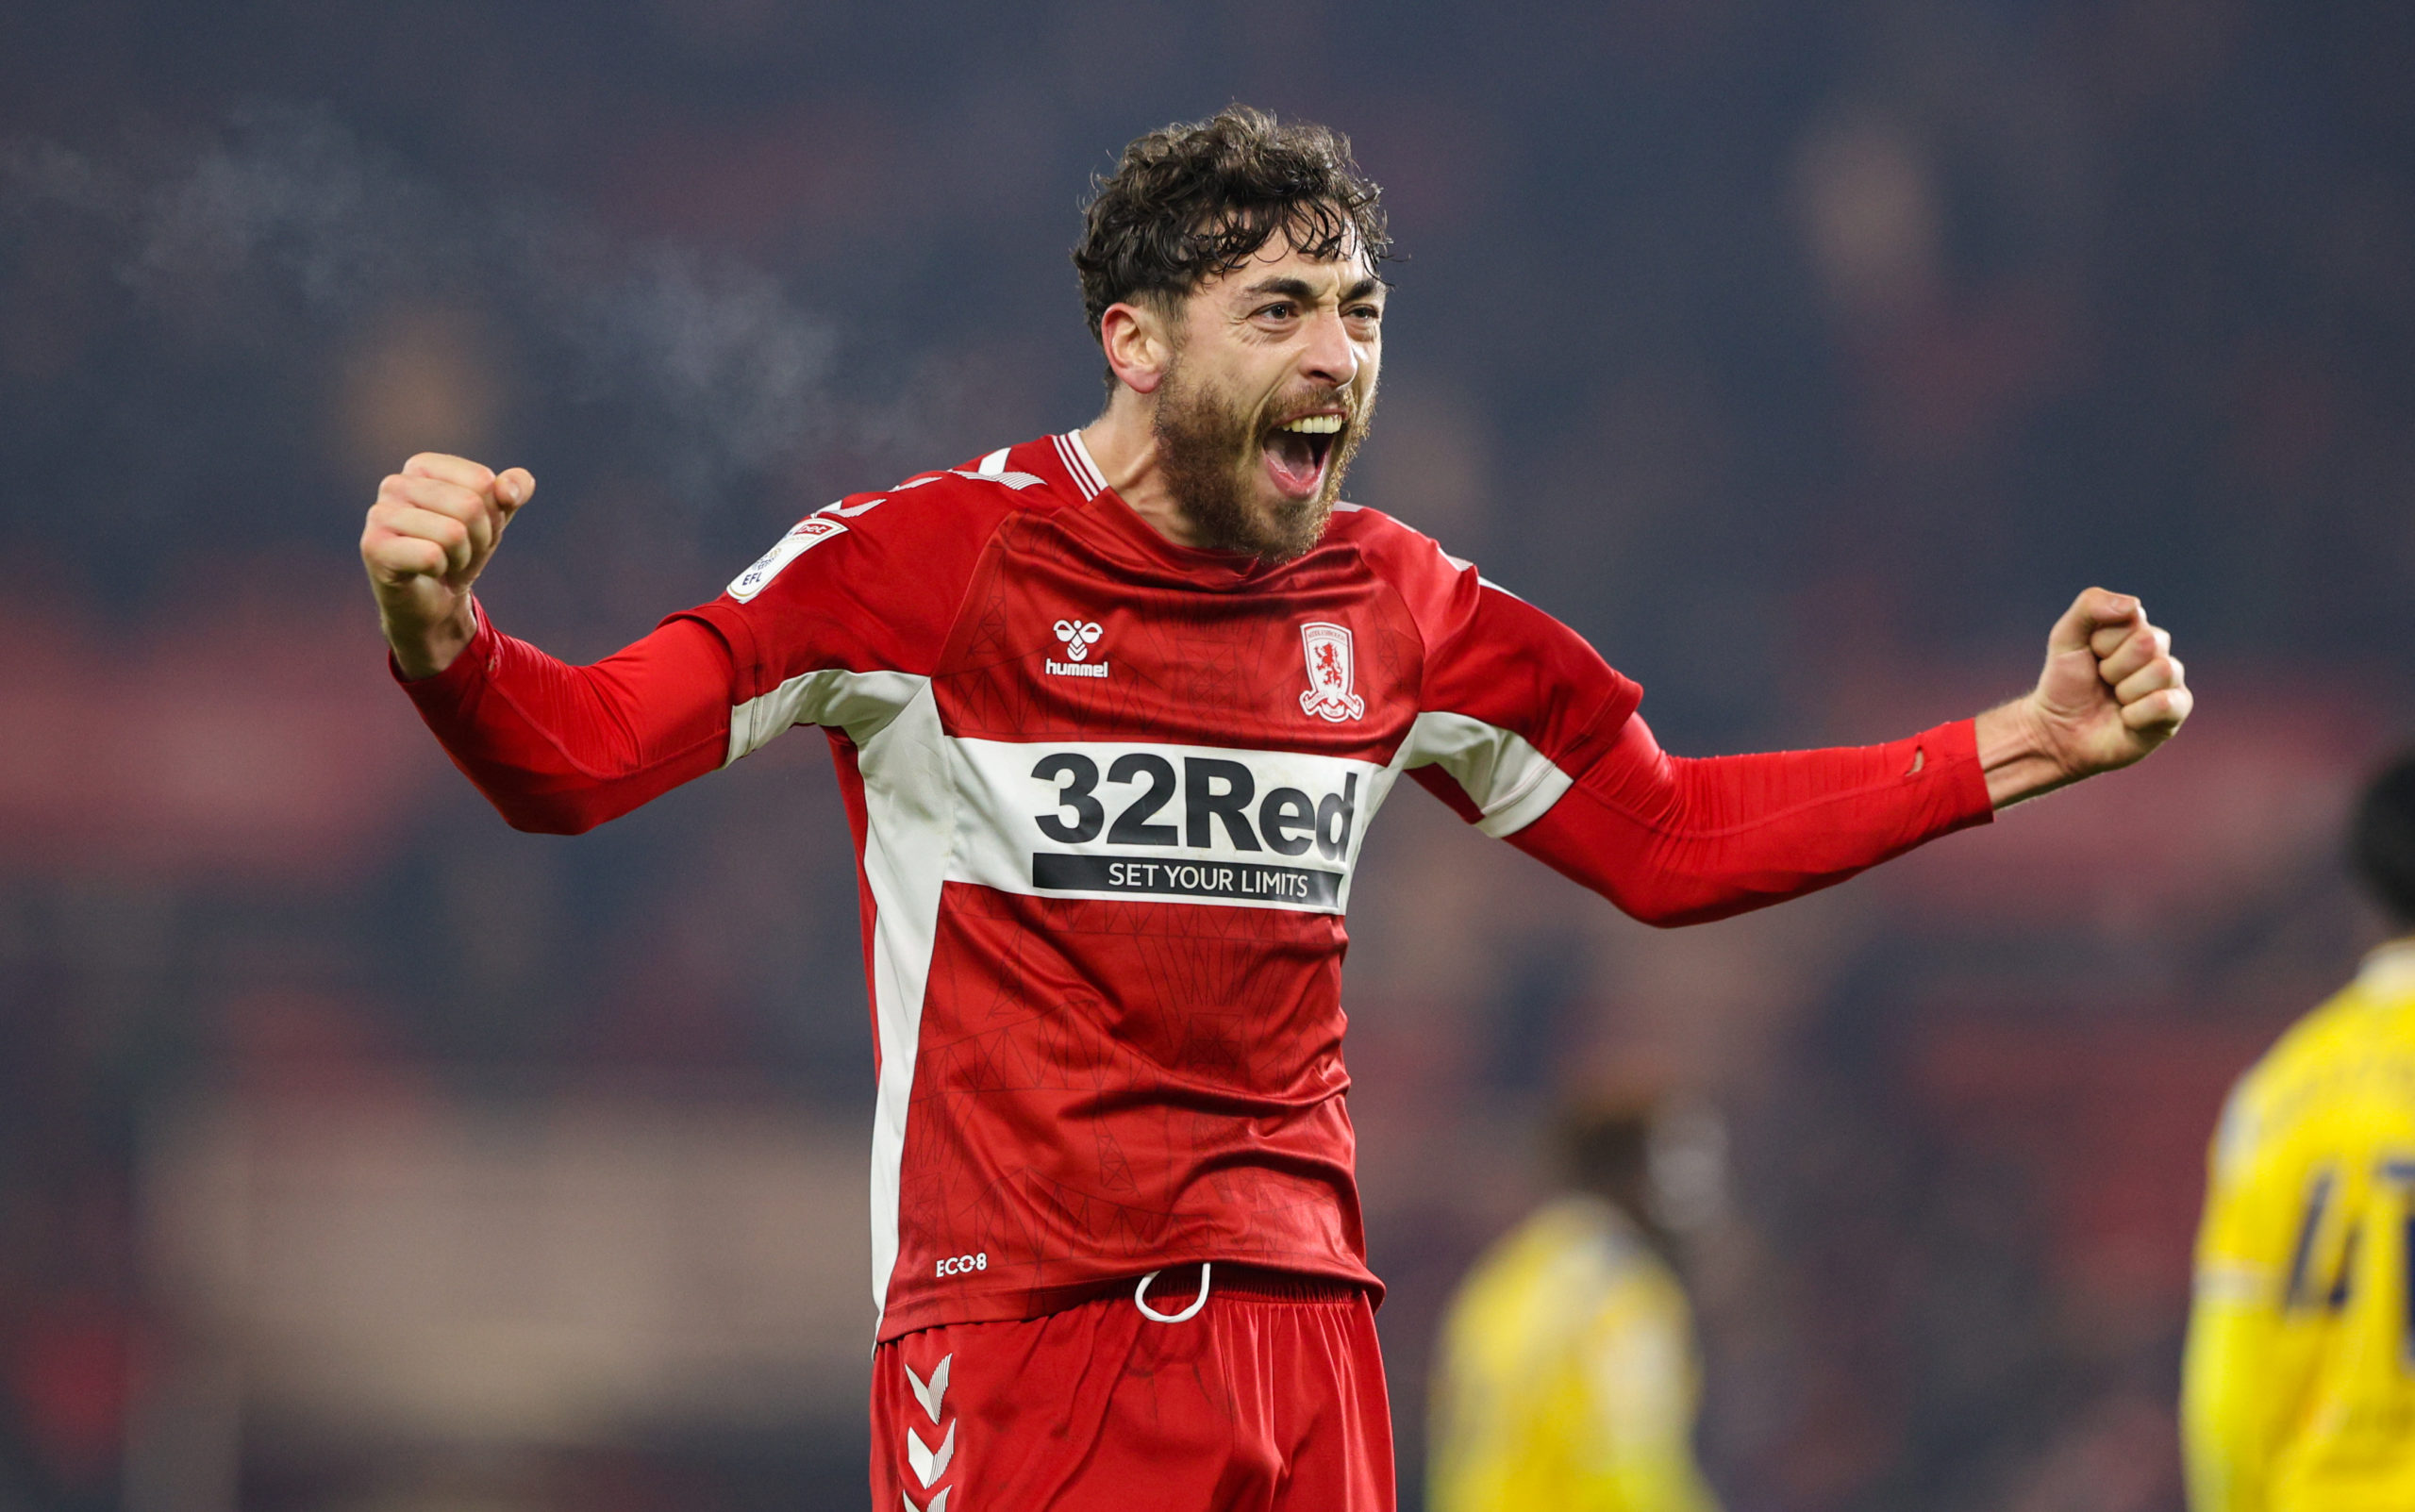 Matt Crooks Age, Salary, Net worth, Current Teams, Career, Height, and much more